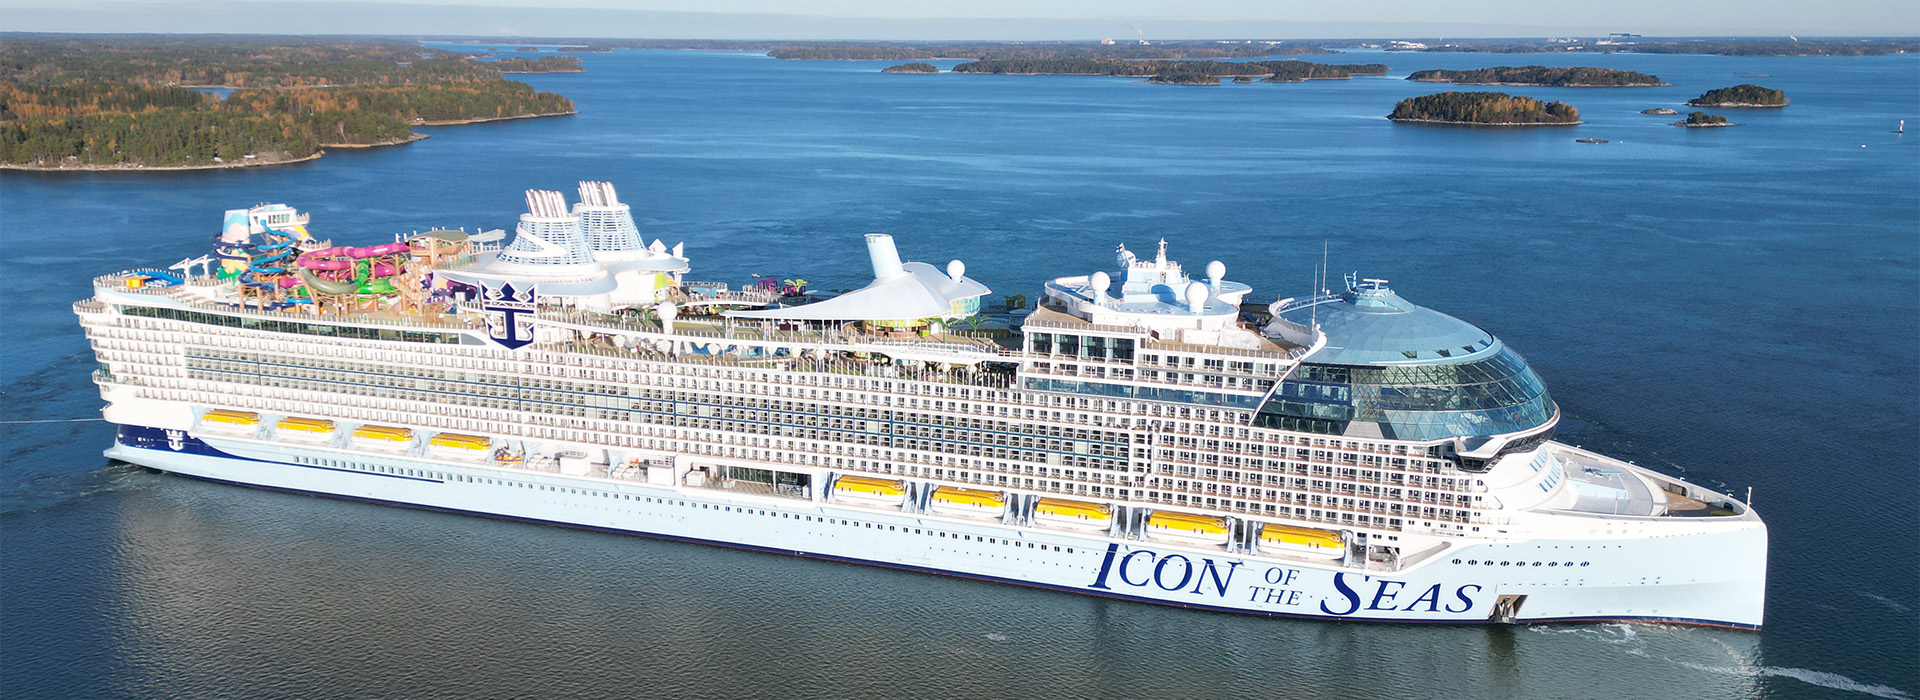 Icon of the Seas is equipped with Koja air conditioning